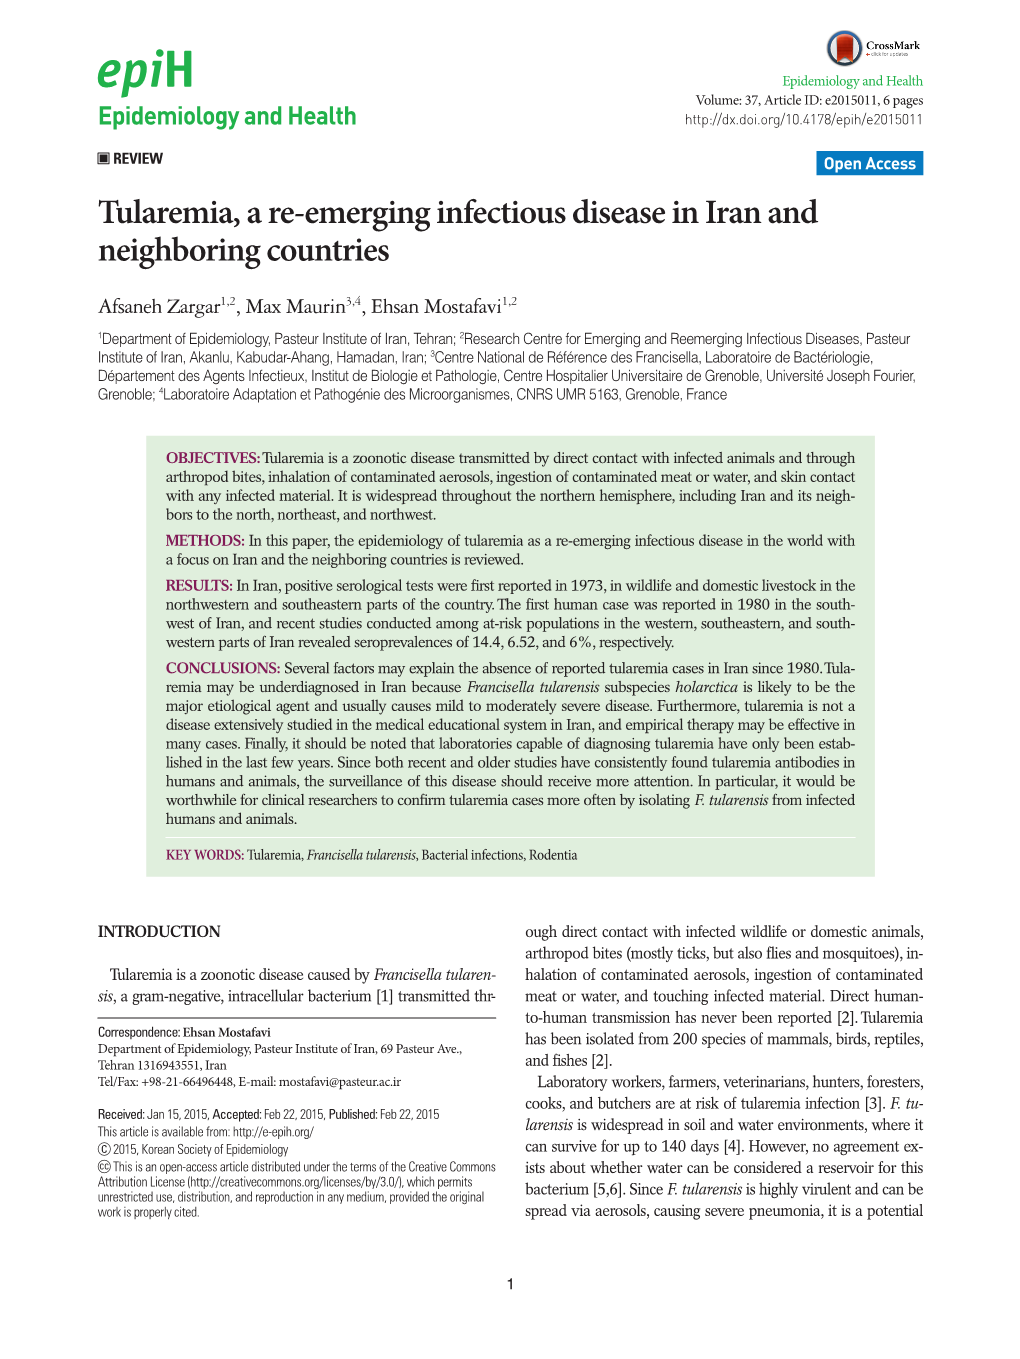 Tularemia, a Re-Emerging Infectious Disease in Iran and Neighboring Countries